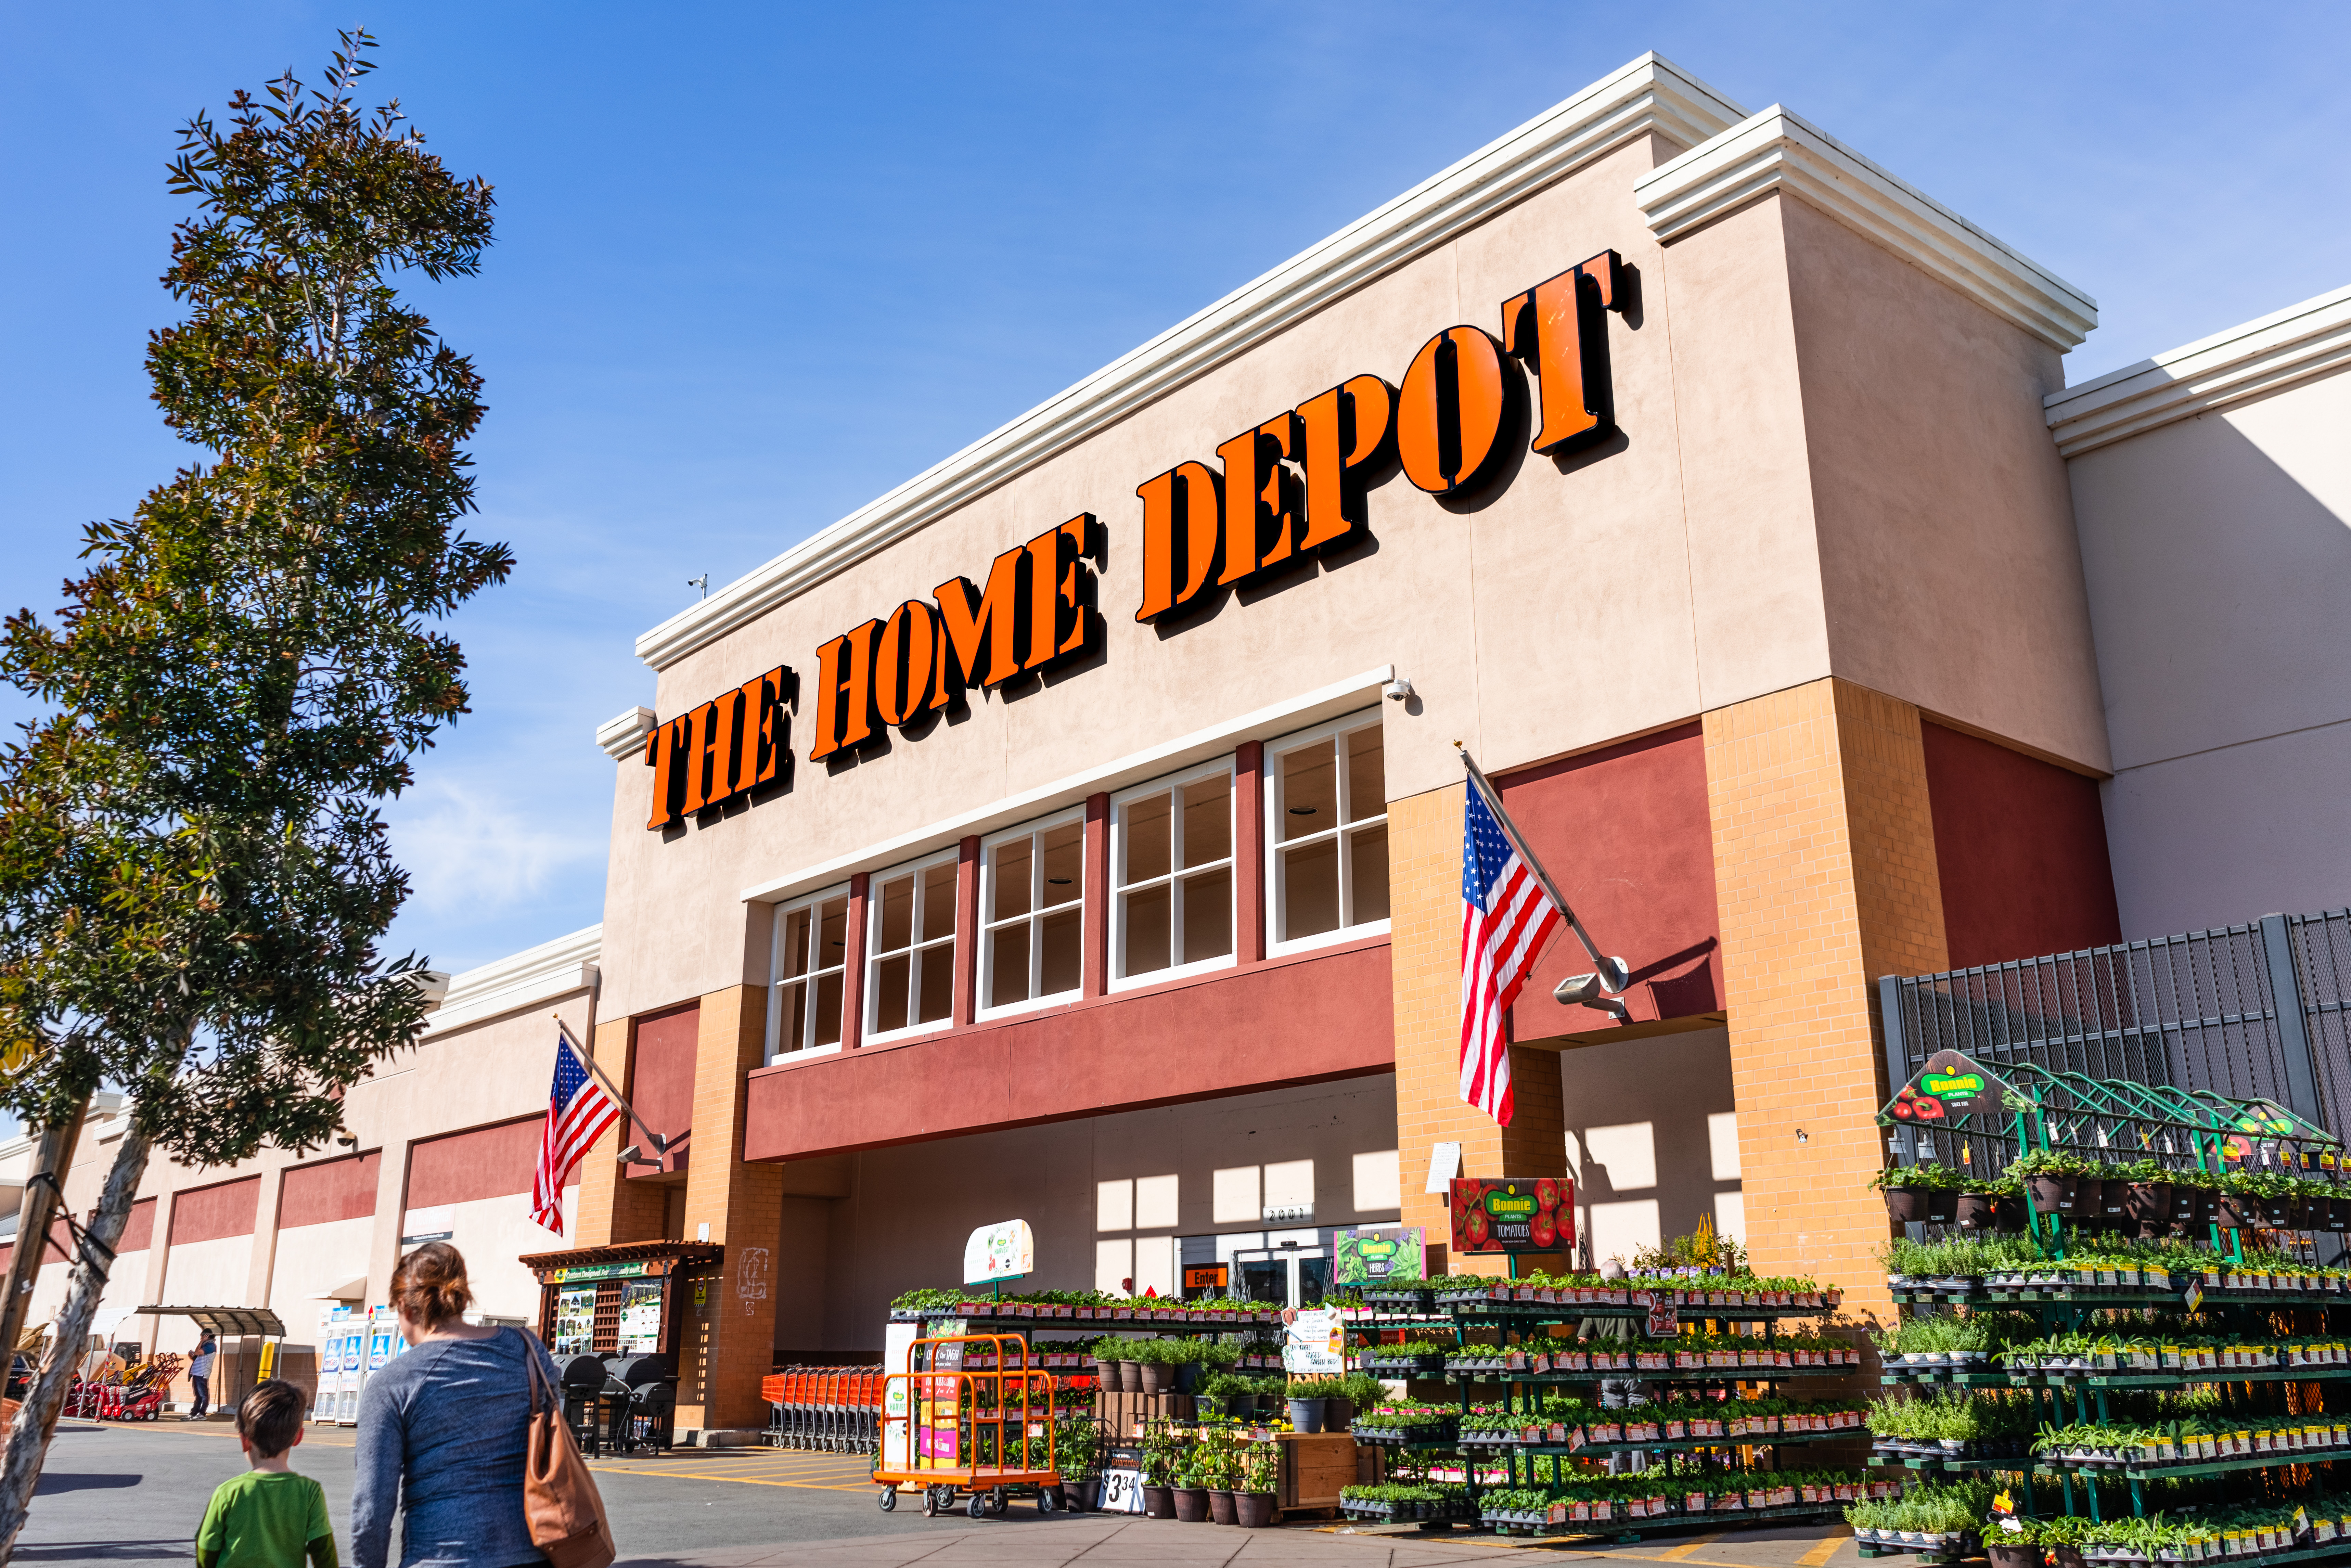 Home Depot's 'One Supply Chain' is taking shape with massive 2021